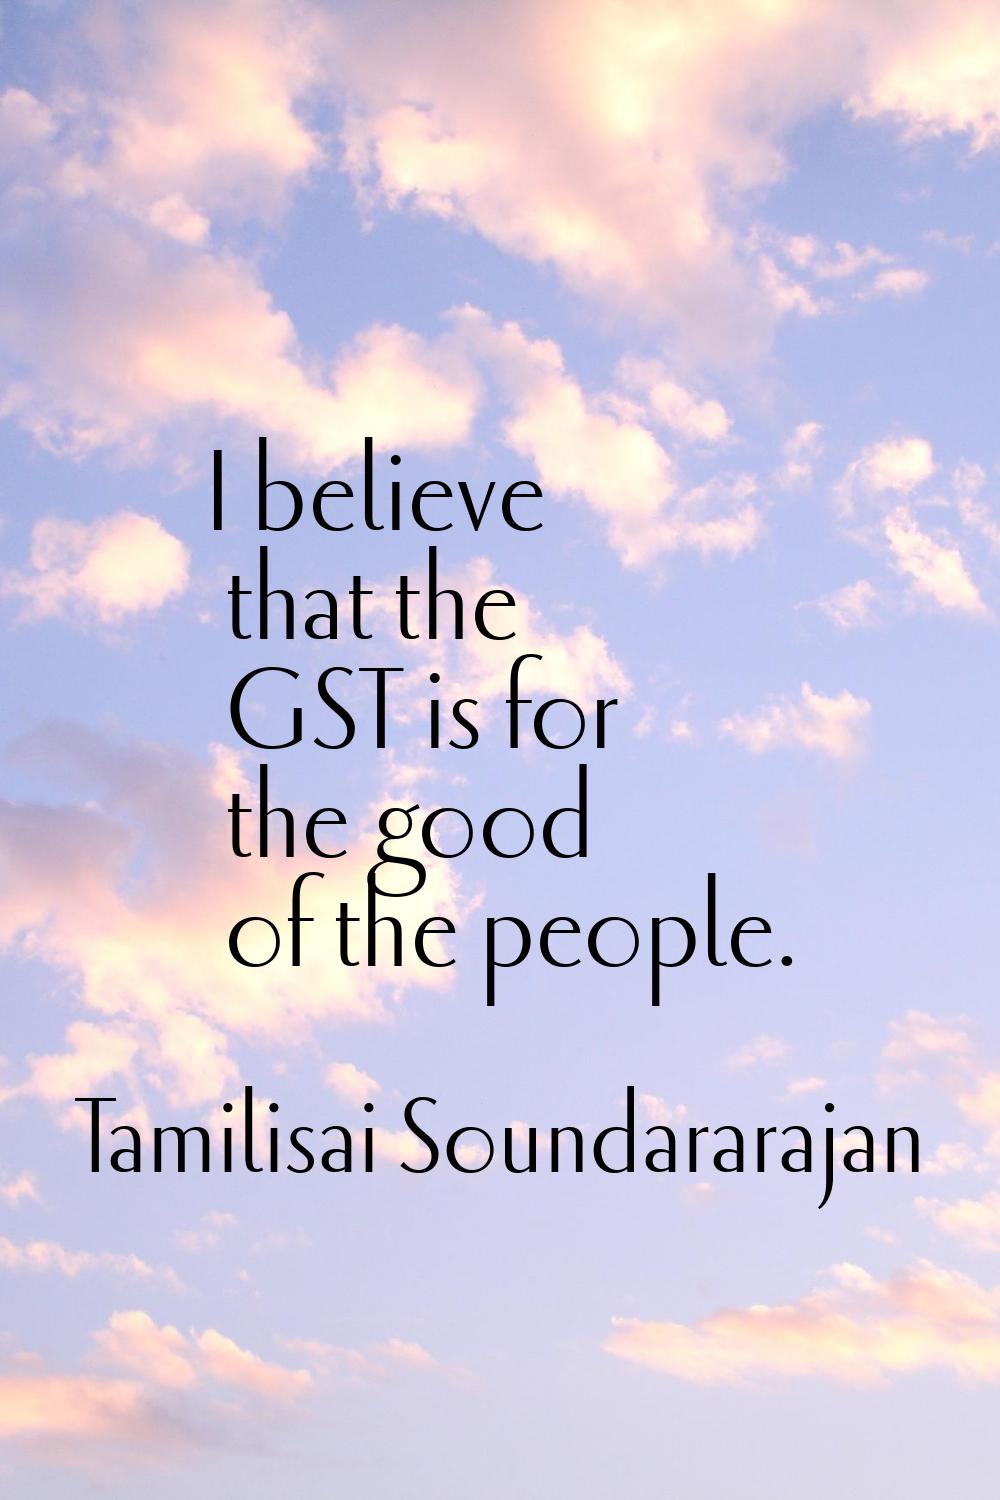 I believe that the GST is for the good of the people.